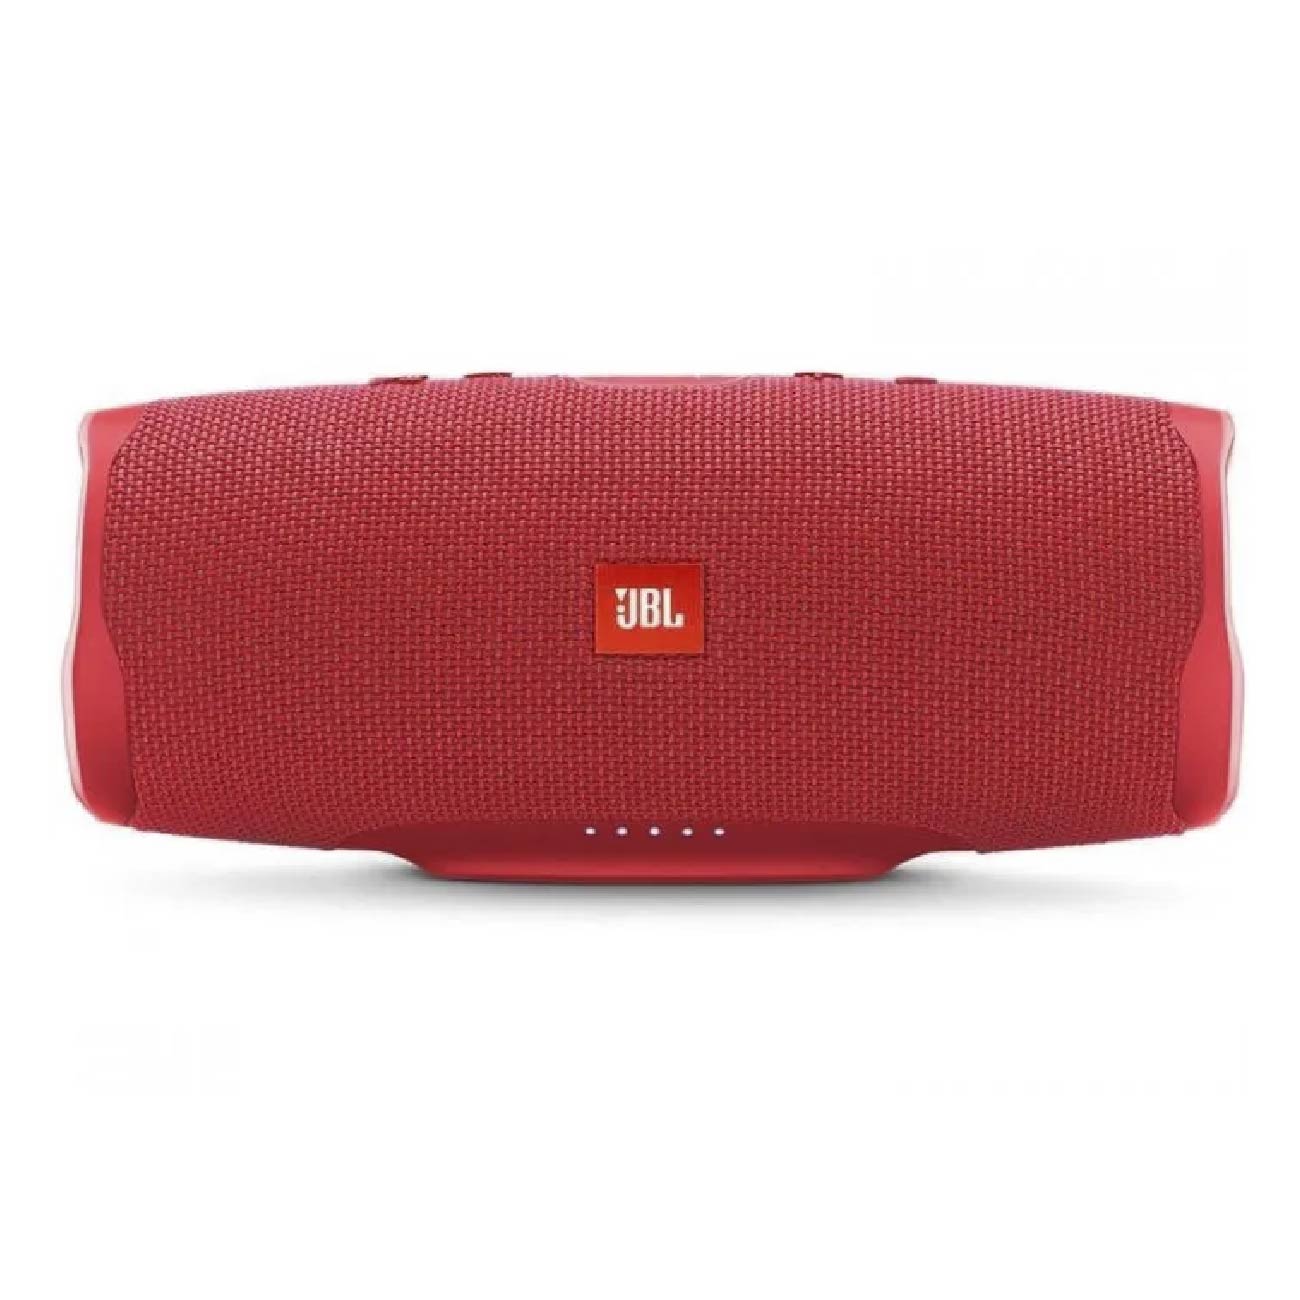 Parlante Jbl Charge 4 Bluetooth Resistente al Argua IPX7 20 Horas